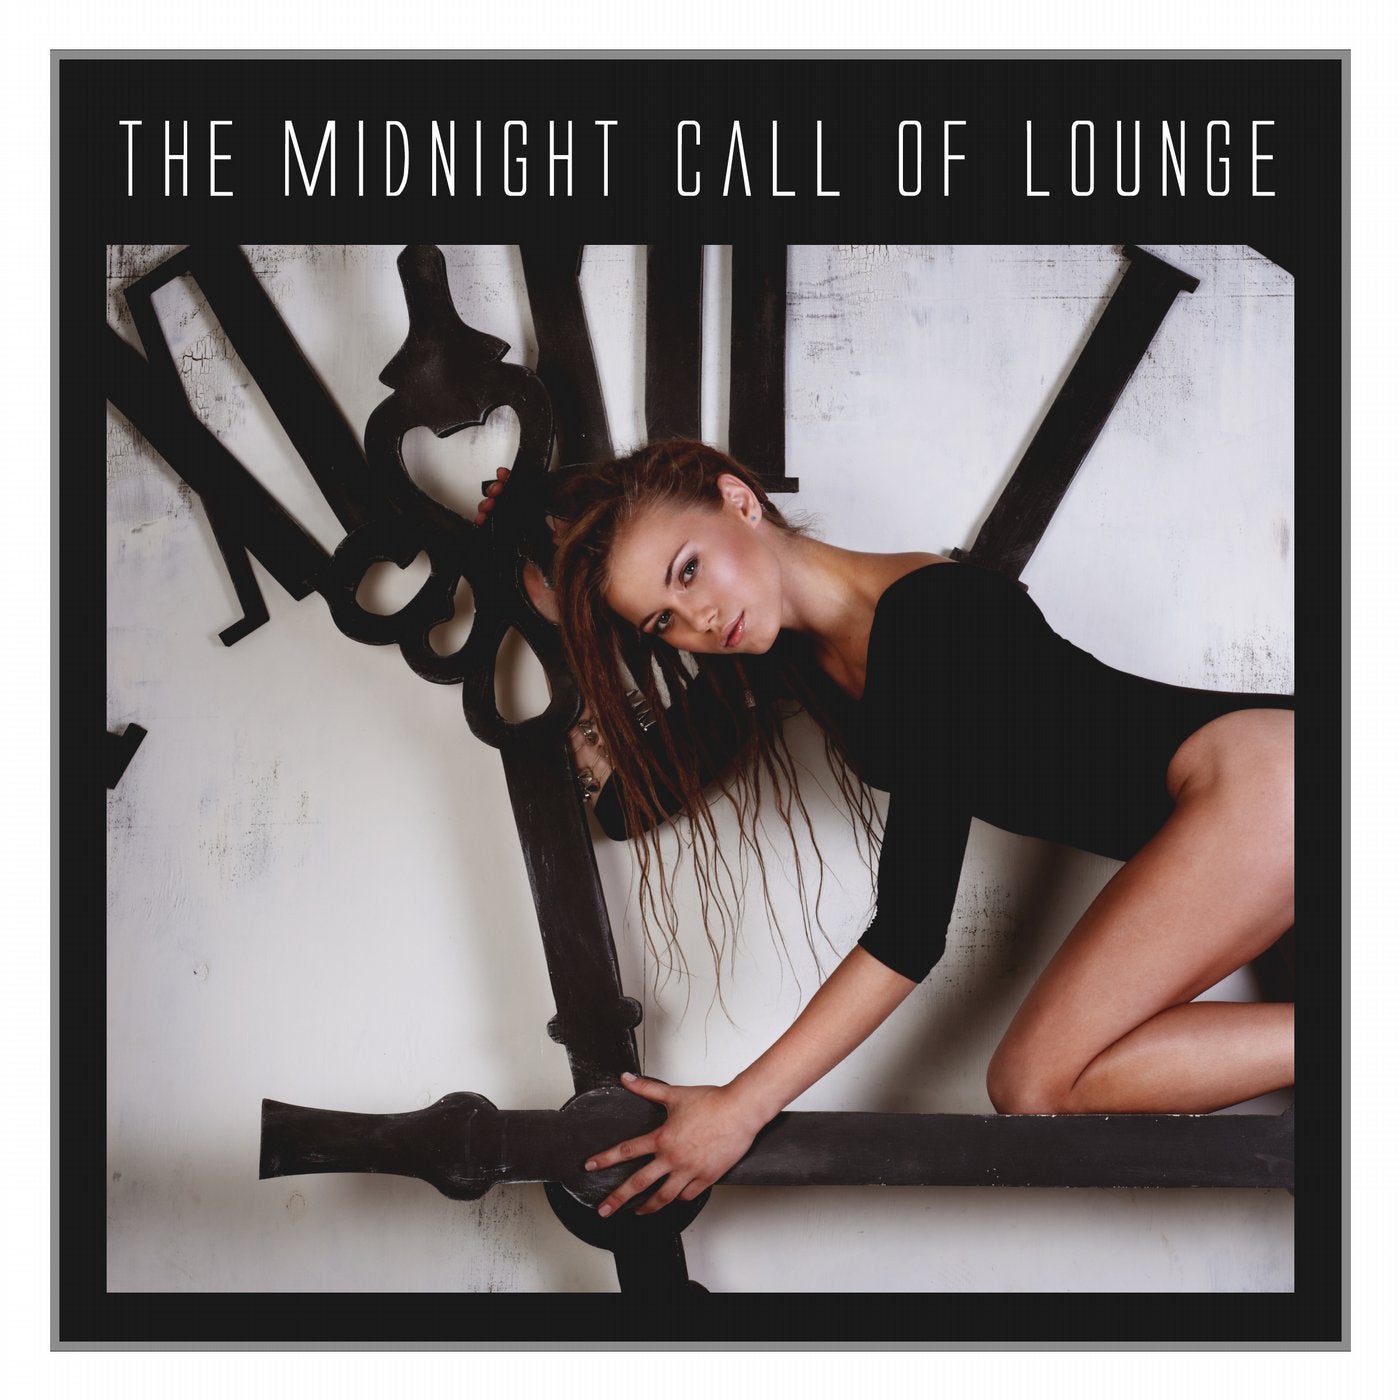 The Midnight Call of Lounge